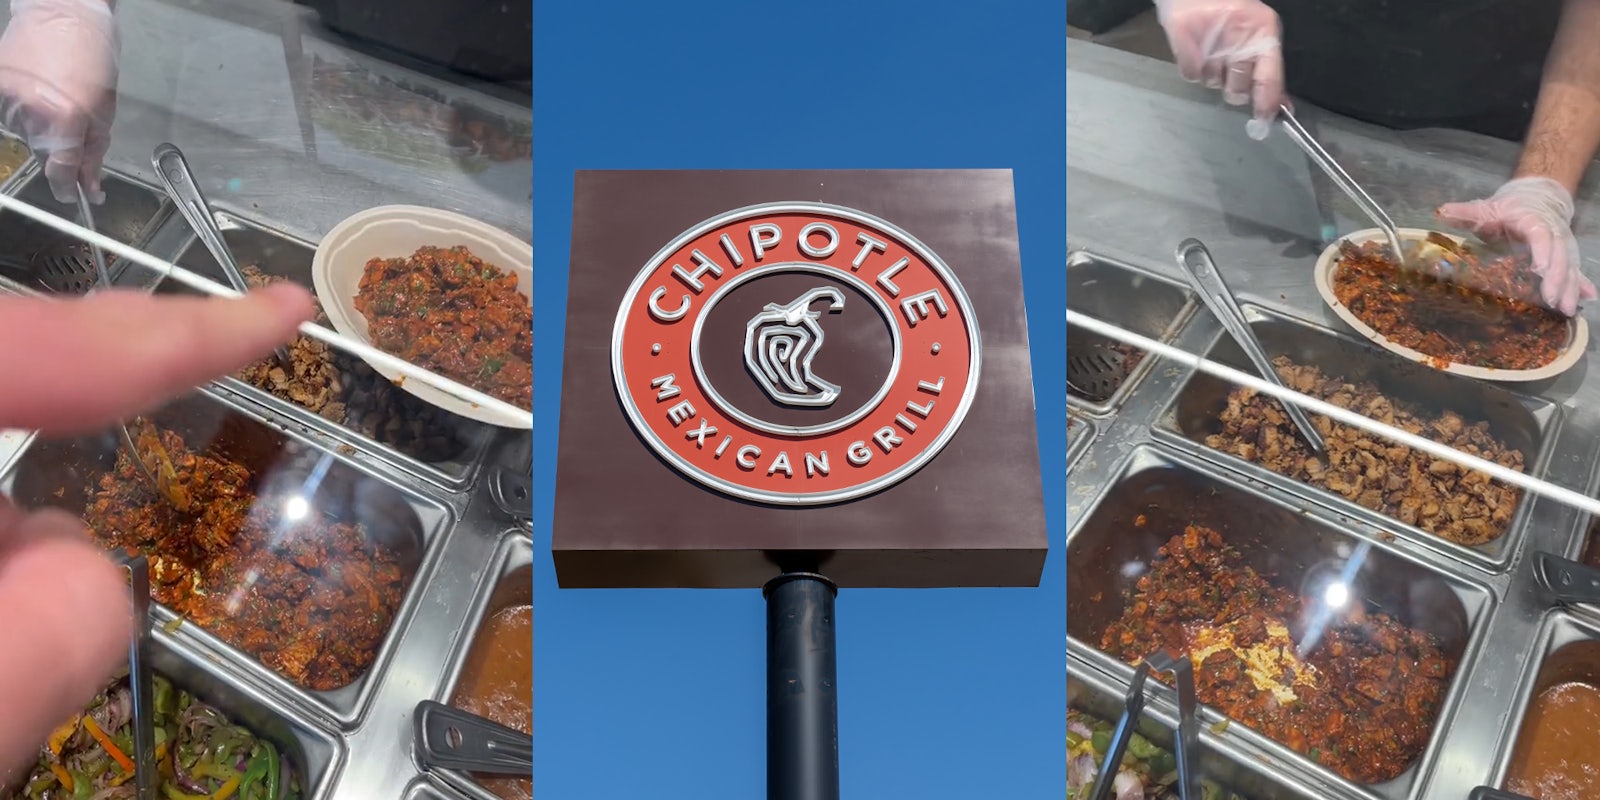 Chipotle customer pointing to meat (l) Chipotle sign in front of blue sky (c) Chipotle worker scooping meat into container (r)